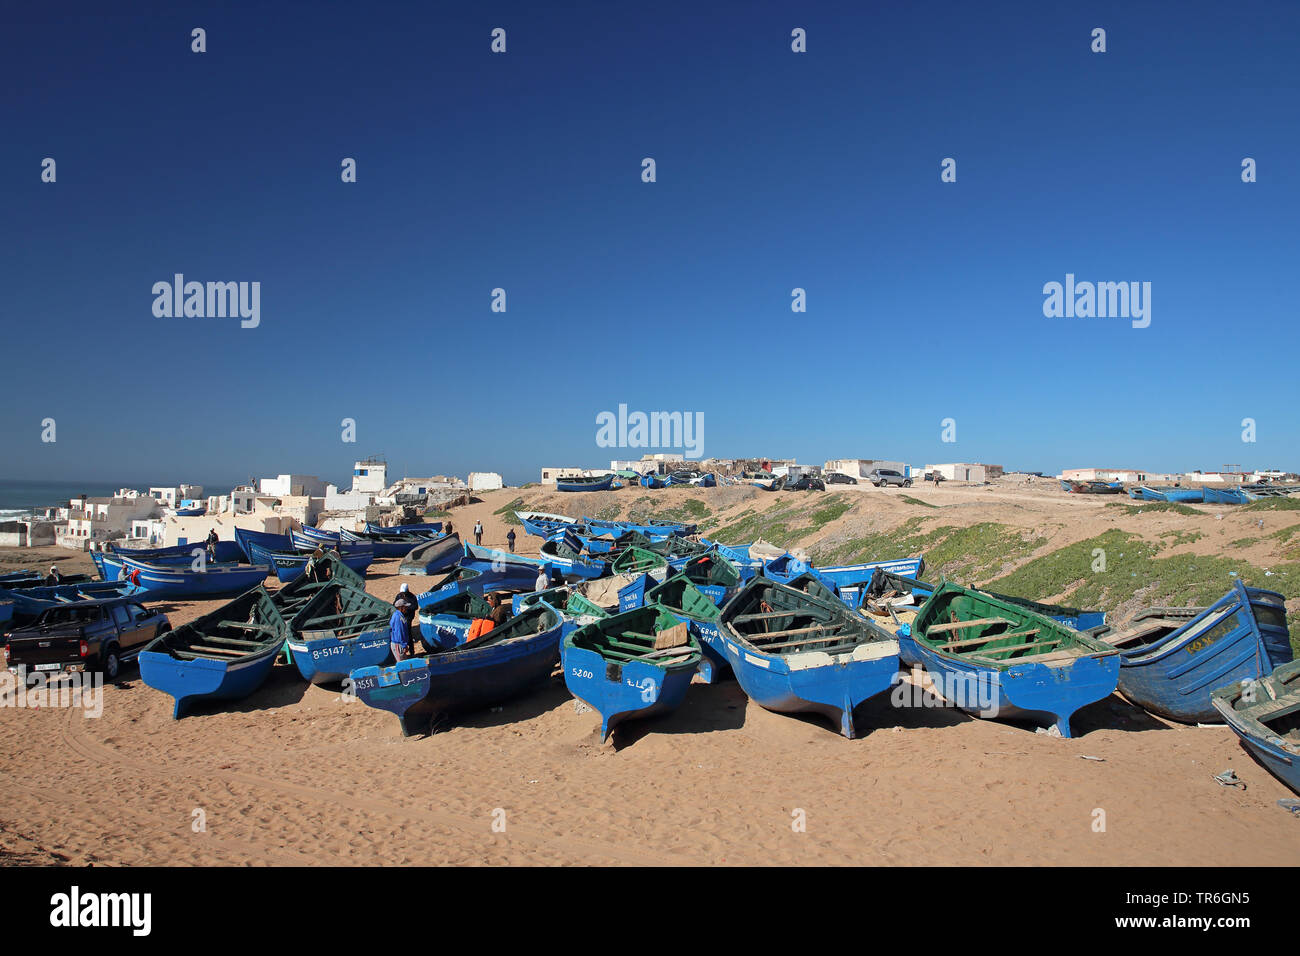 fishing boats on the beach in Tifnite, Morocco, Souss Massa National Park Stock Photo